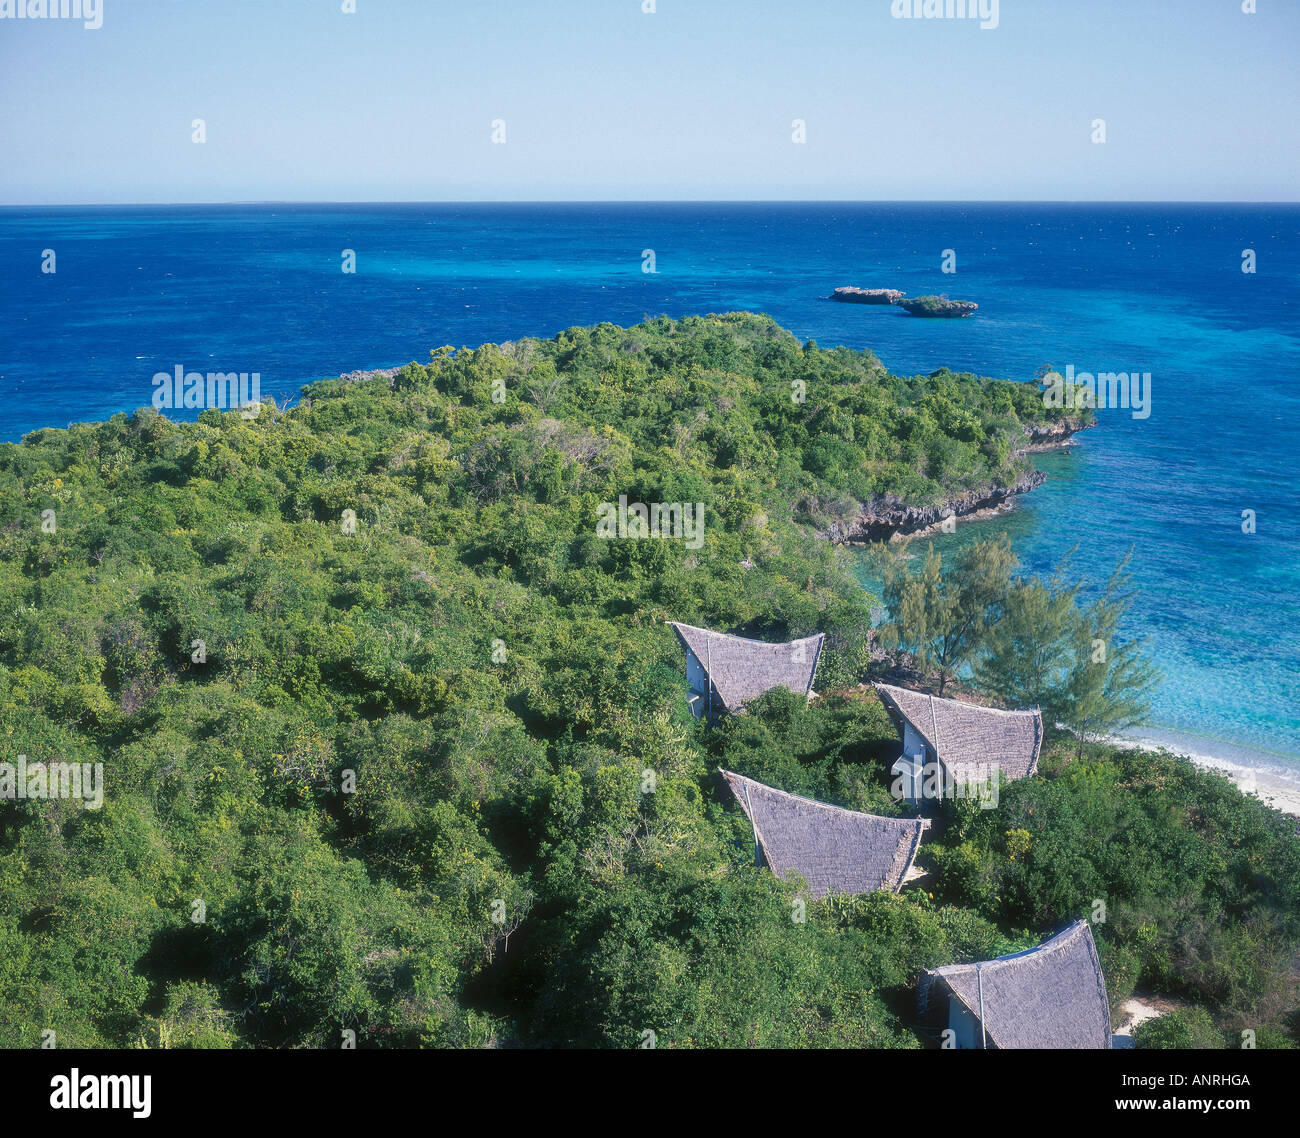 Looking over the forest expanse of Chumbe Island with thatched bandas huts in the foreground Stock Photo